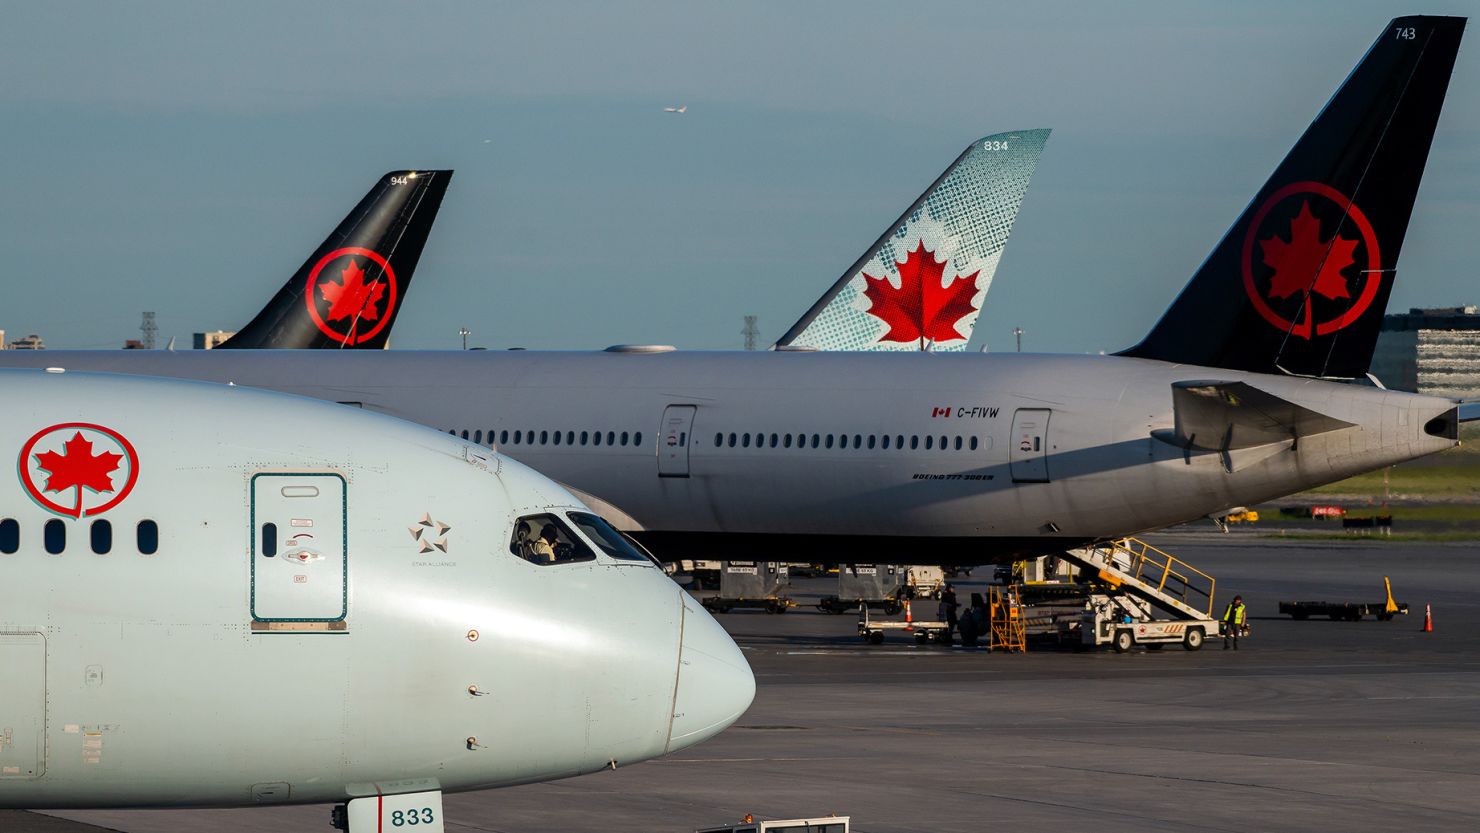 Air Canada has apologized to the affected passengers.